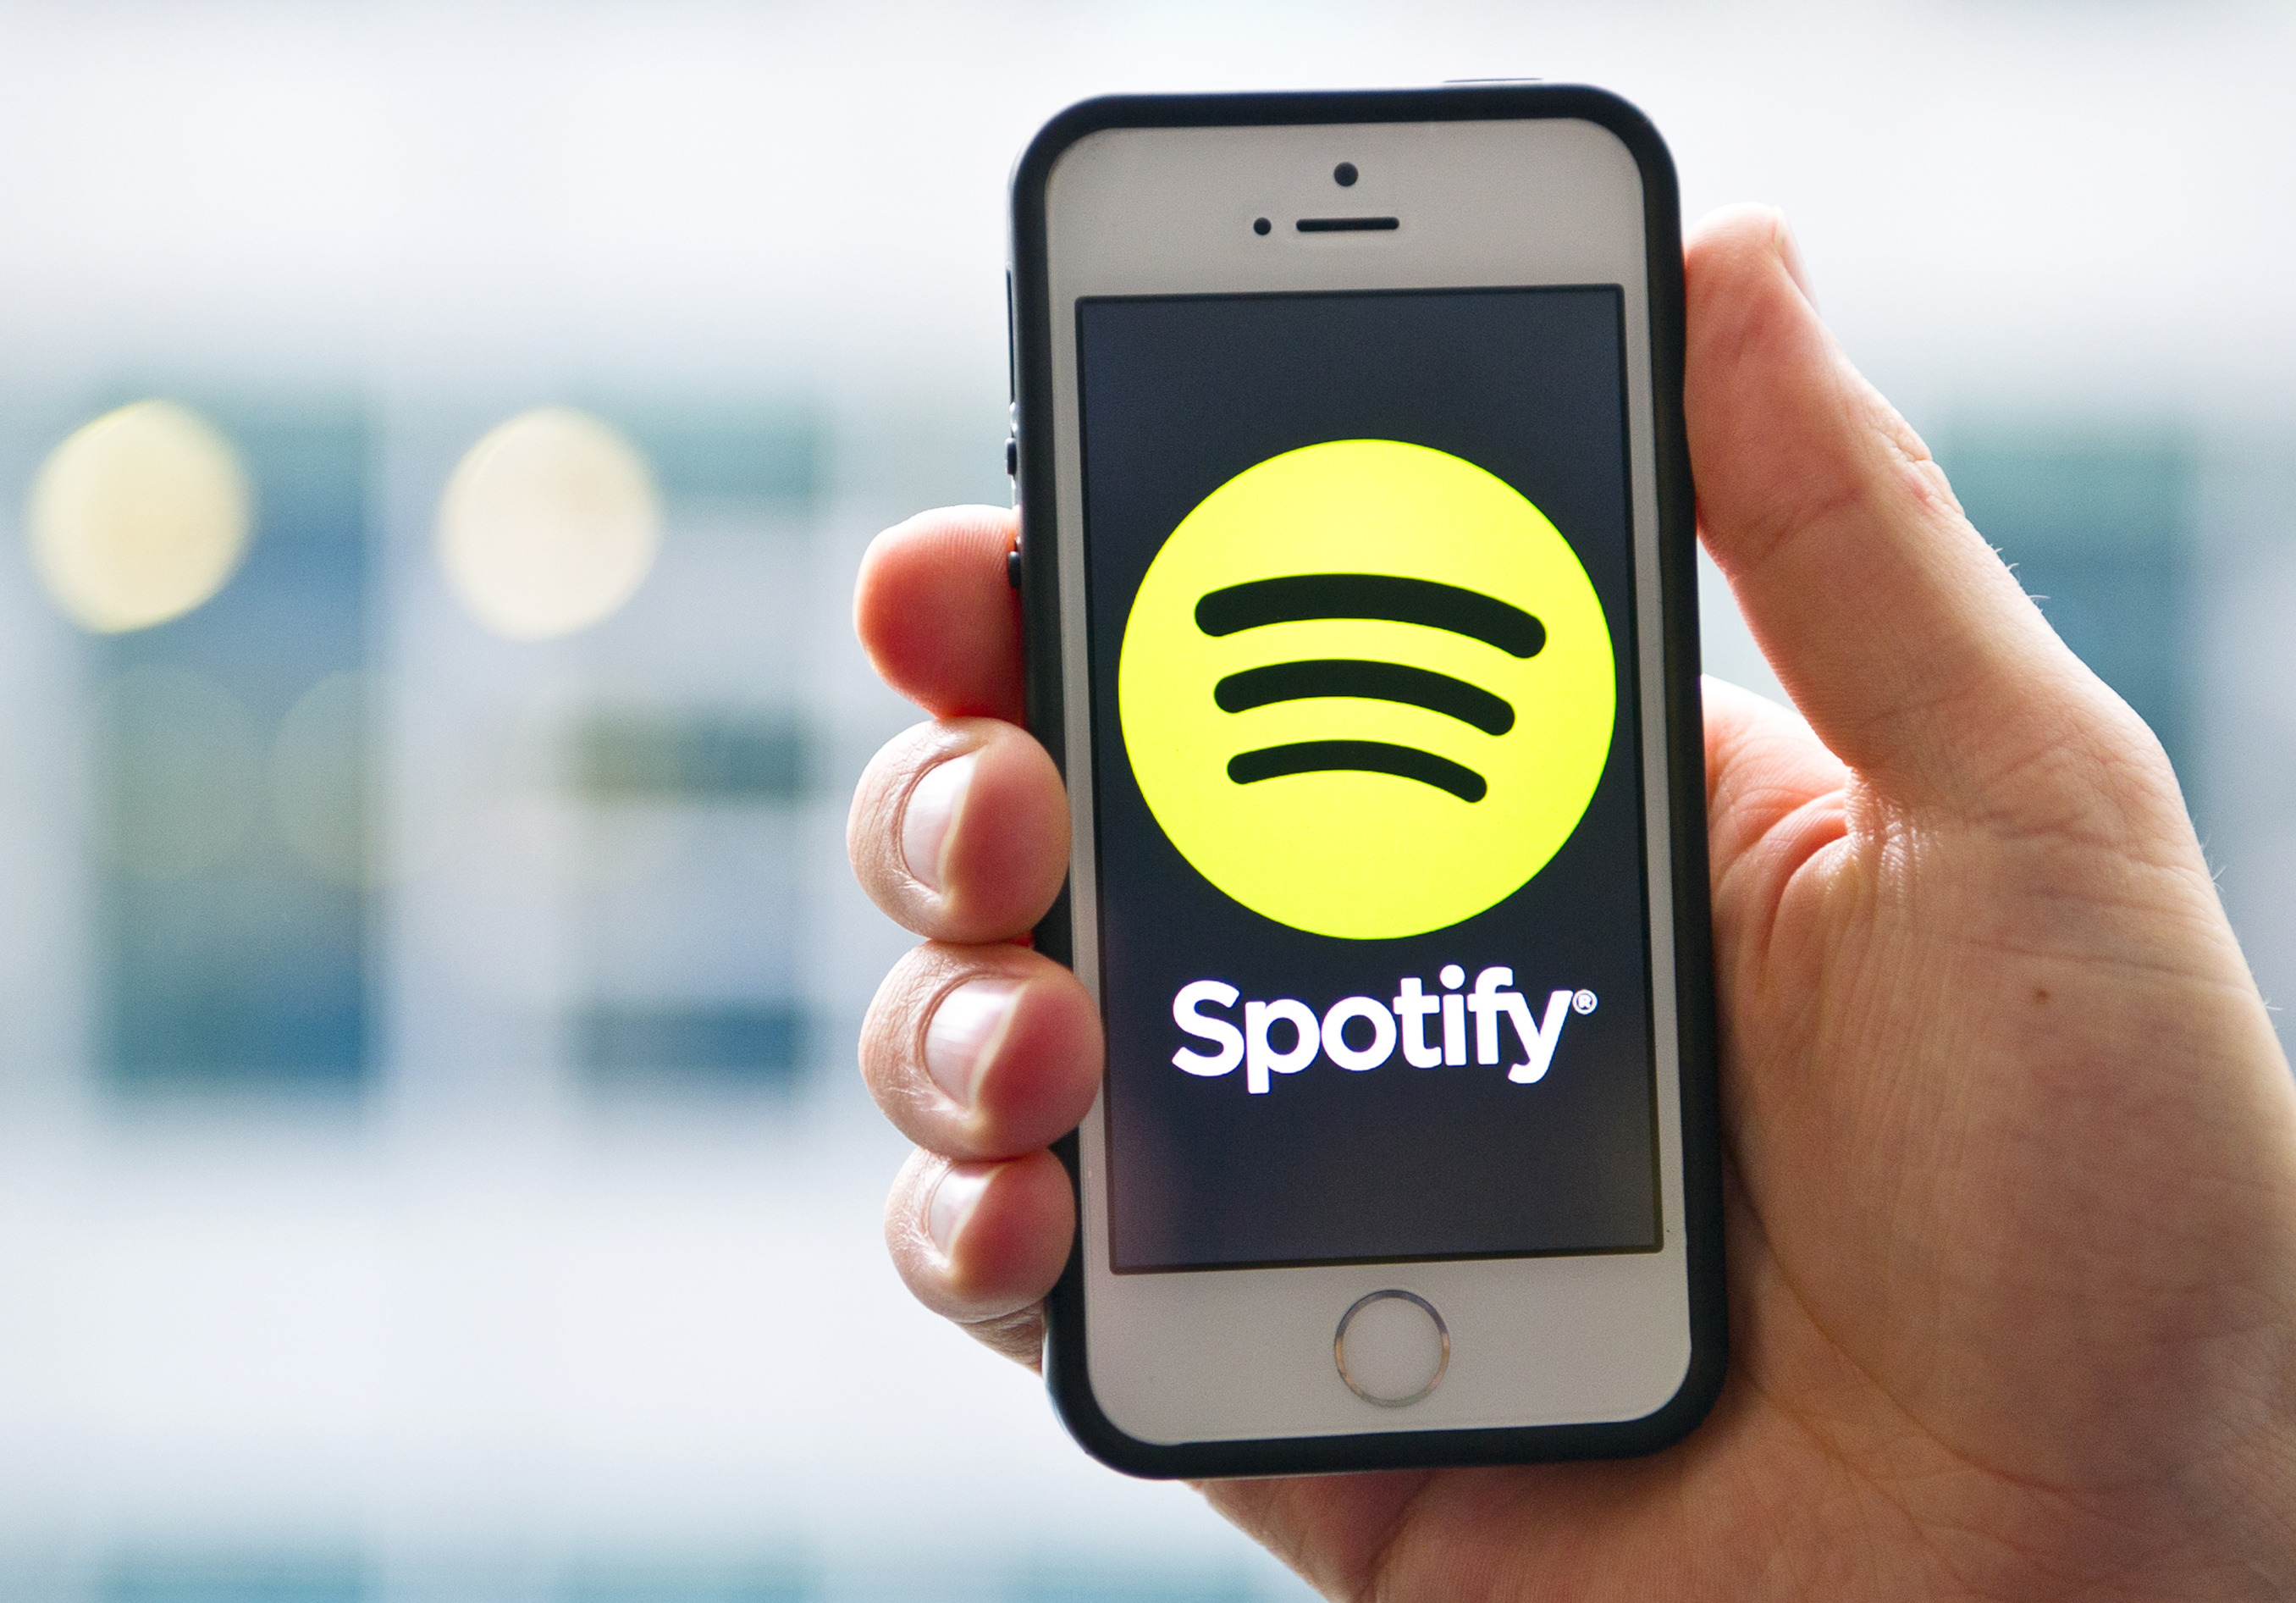 Spotify logo displayed on an iPhone. (Daniel Bockwoldt—picture-alliance/dpa/AP Images)